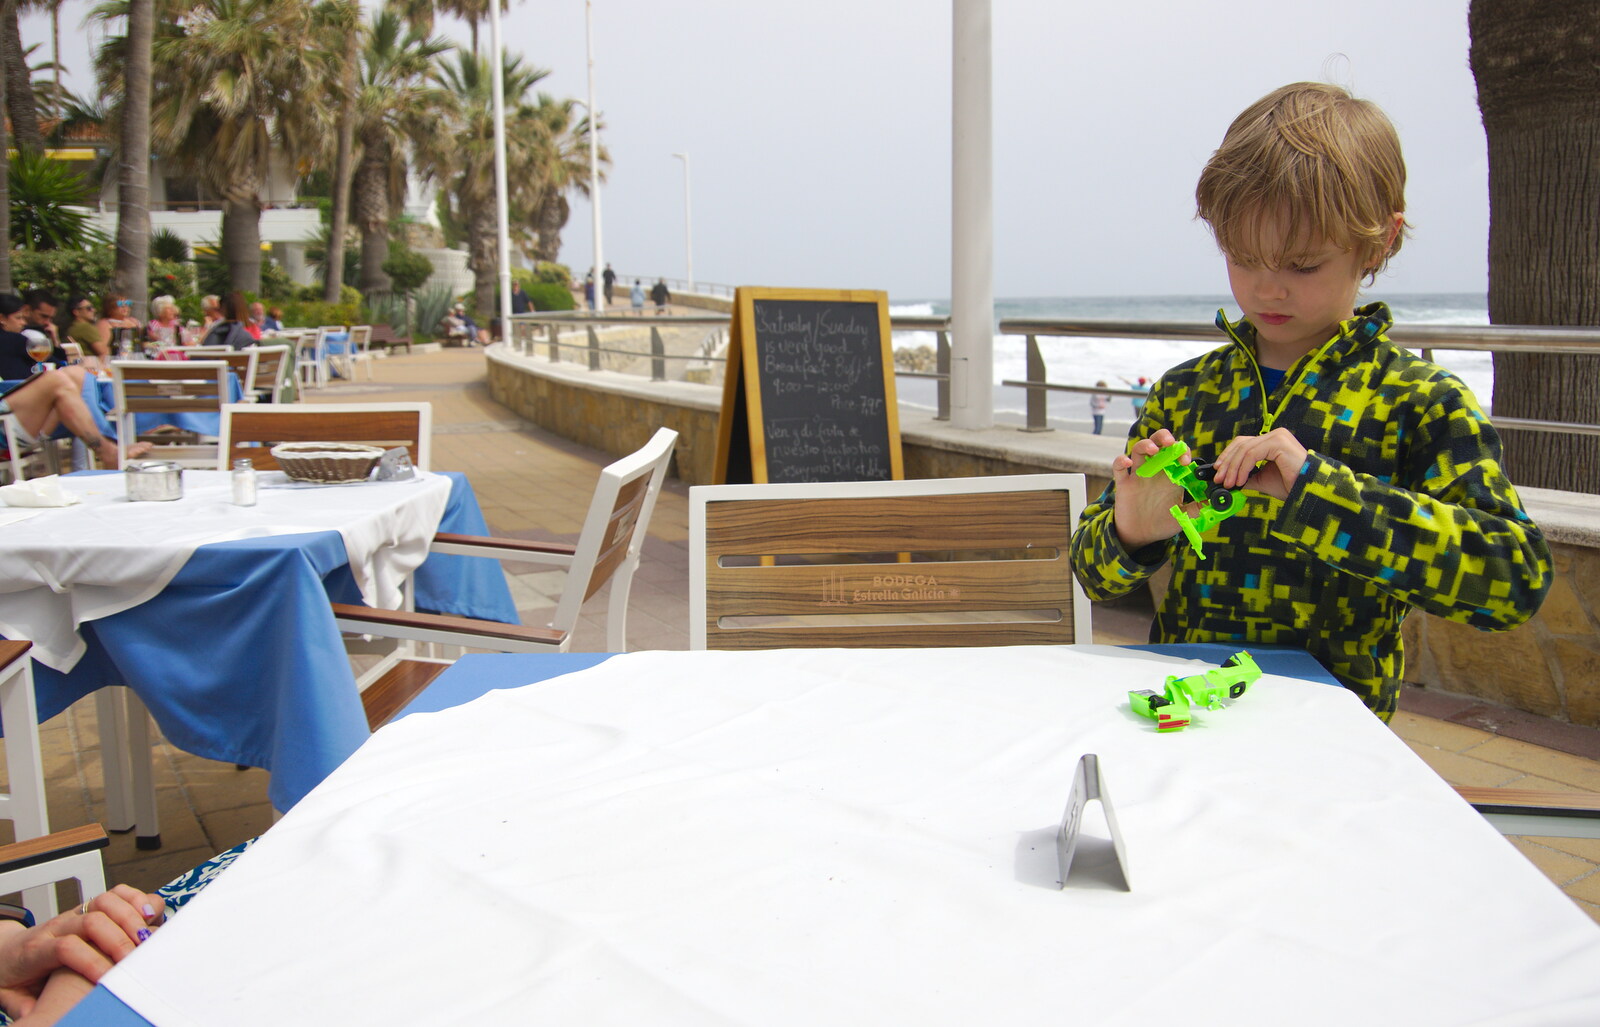 Harry plays with a new toy from Torrecilla Beach and the Nerja Museum, Andalusia, Spain - 17th April 2019